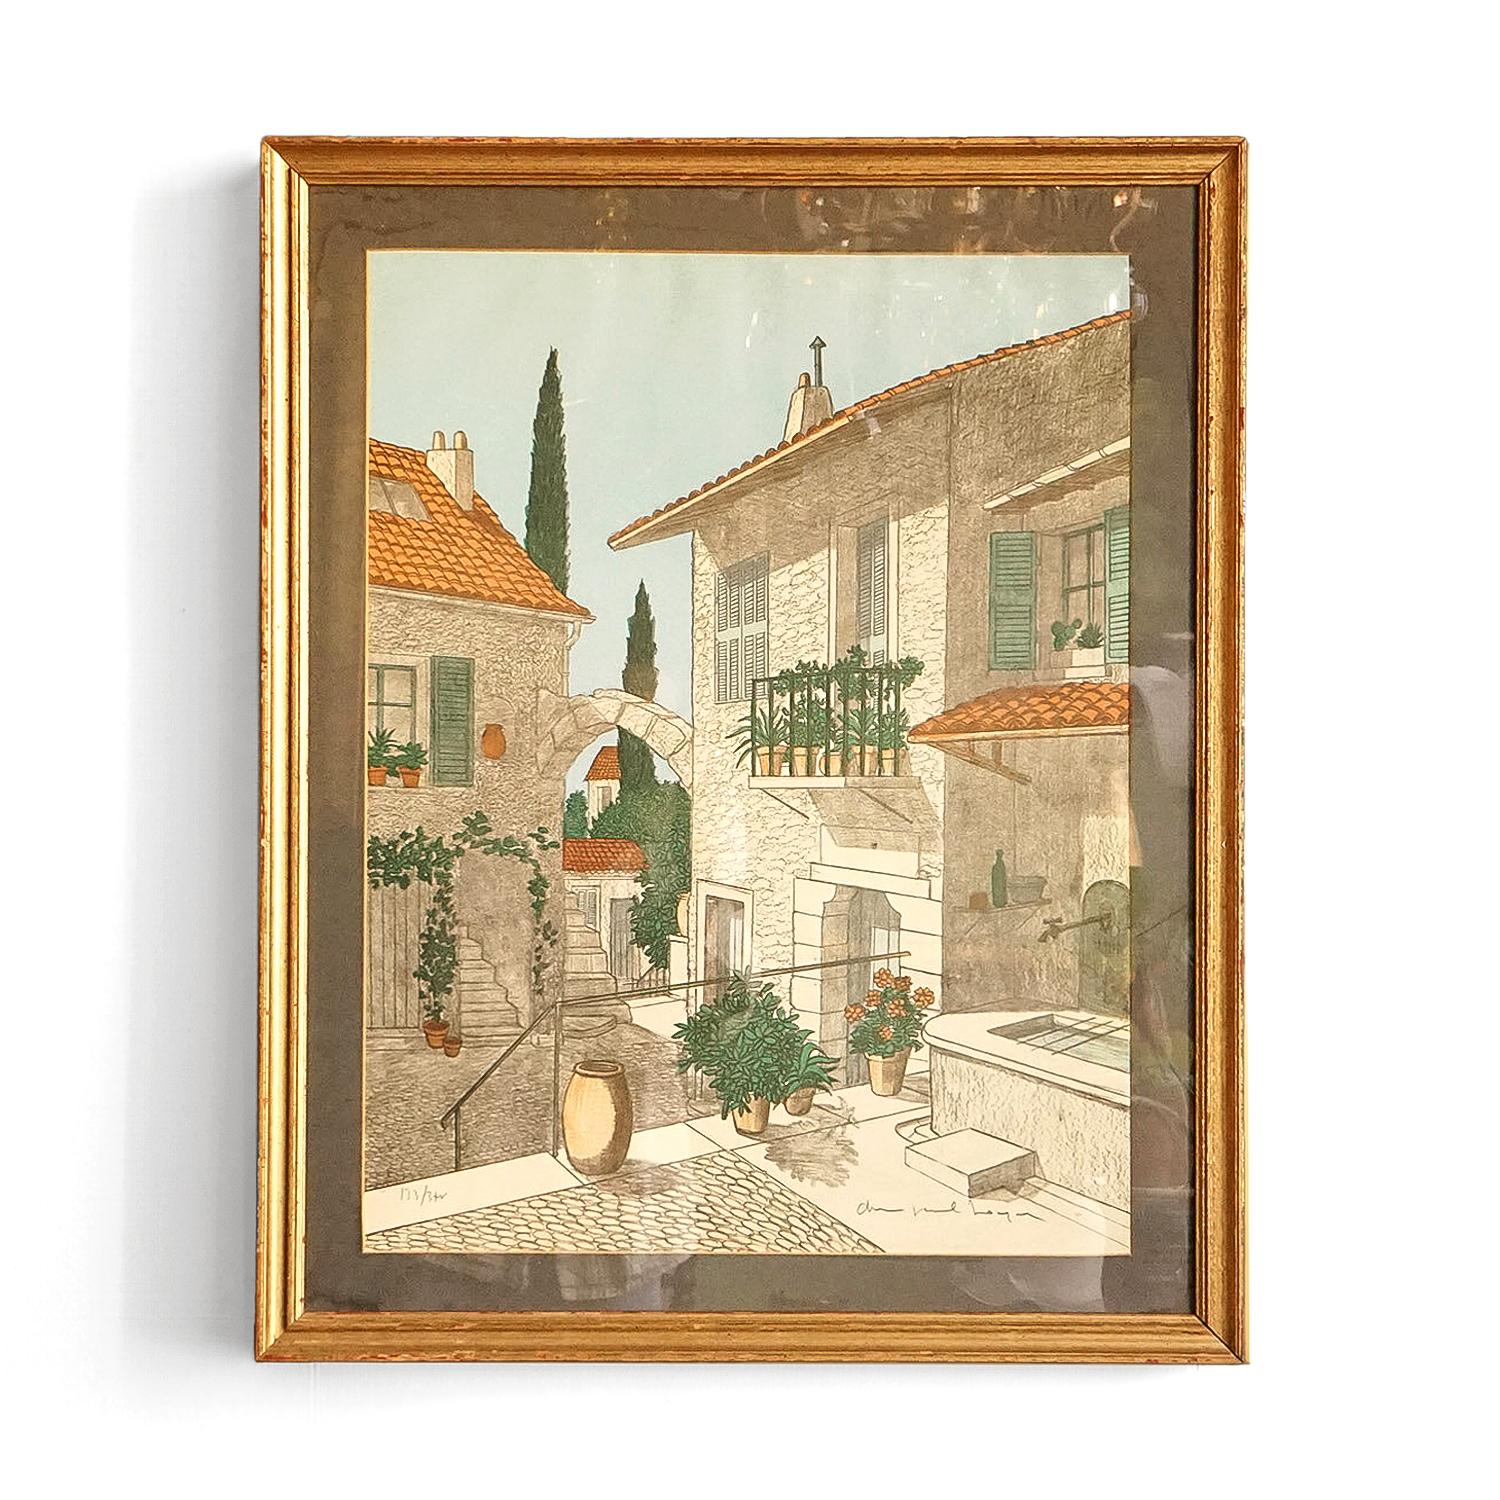 MID-CENTURY FRAMED PRINT
A stylised image depicting an evocative typically Mediterranean scene of whitewashed buildings with terracotta roof tiles and lush green planting and a blue sky.

Born in Paris in 1940, Denis Paul Noyer first studied with